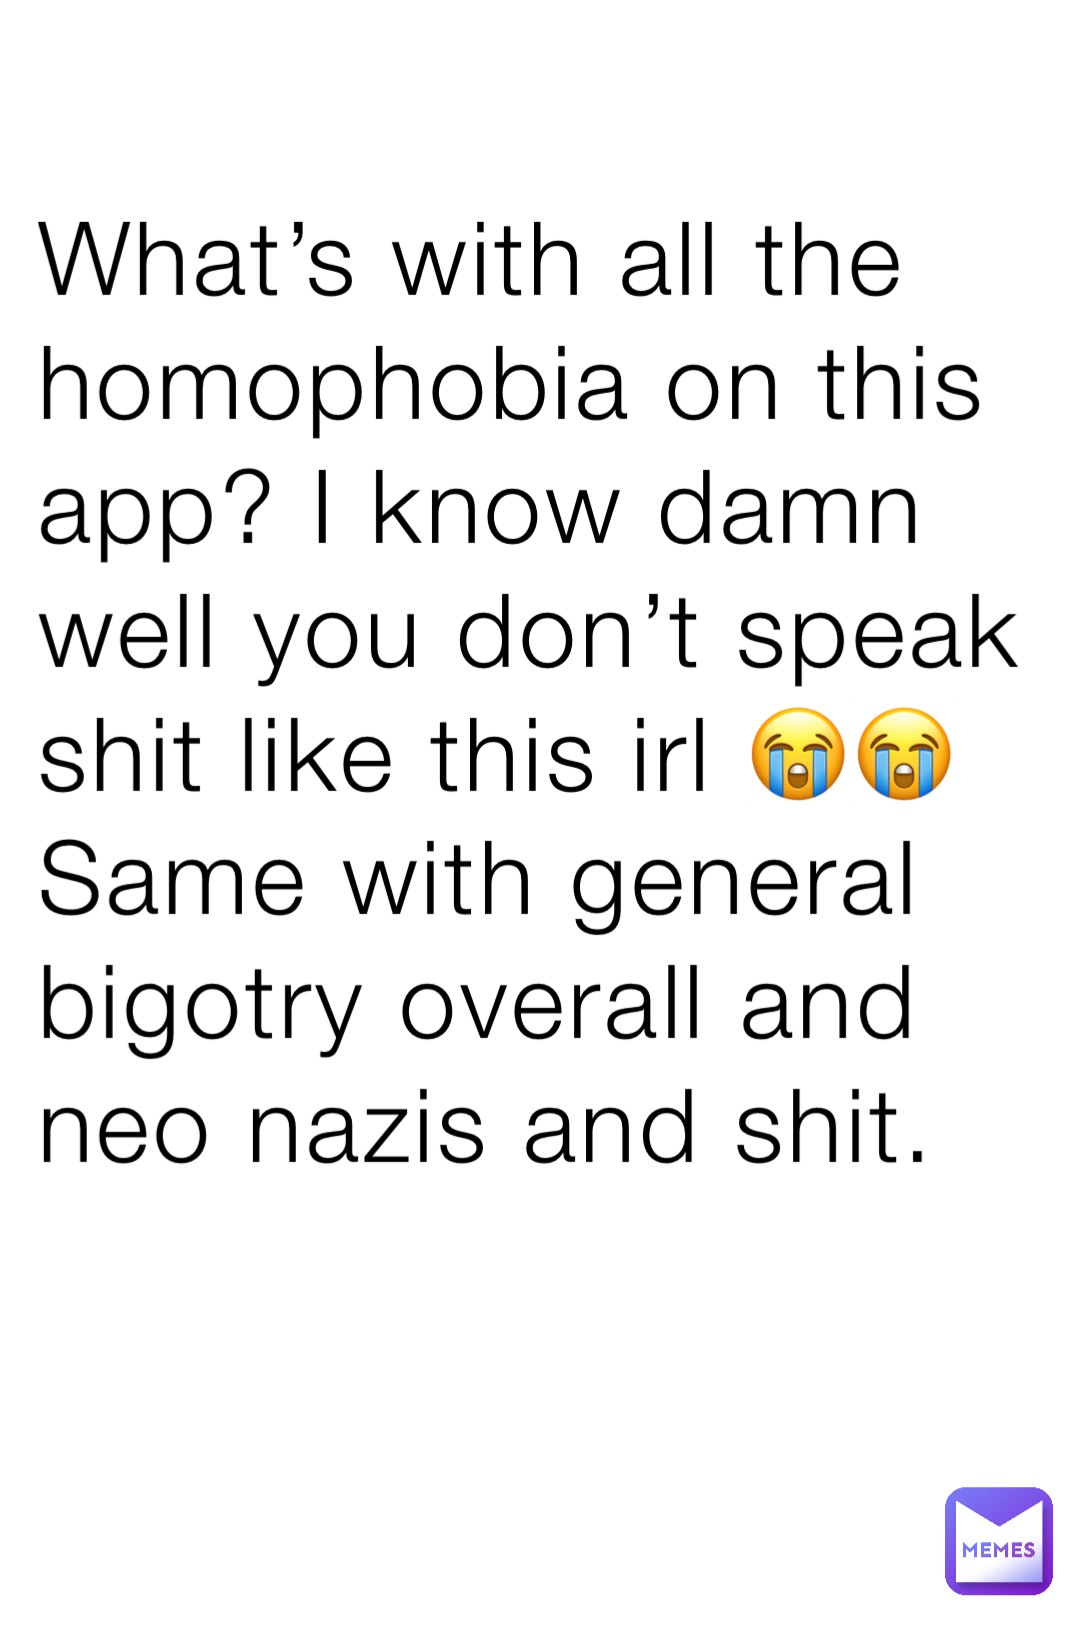 What’s with all the homophobia on this app? I know damn well you don’t speak shit like this irl 😭😭 Same with general bigotry overall and neo nazis and shit.